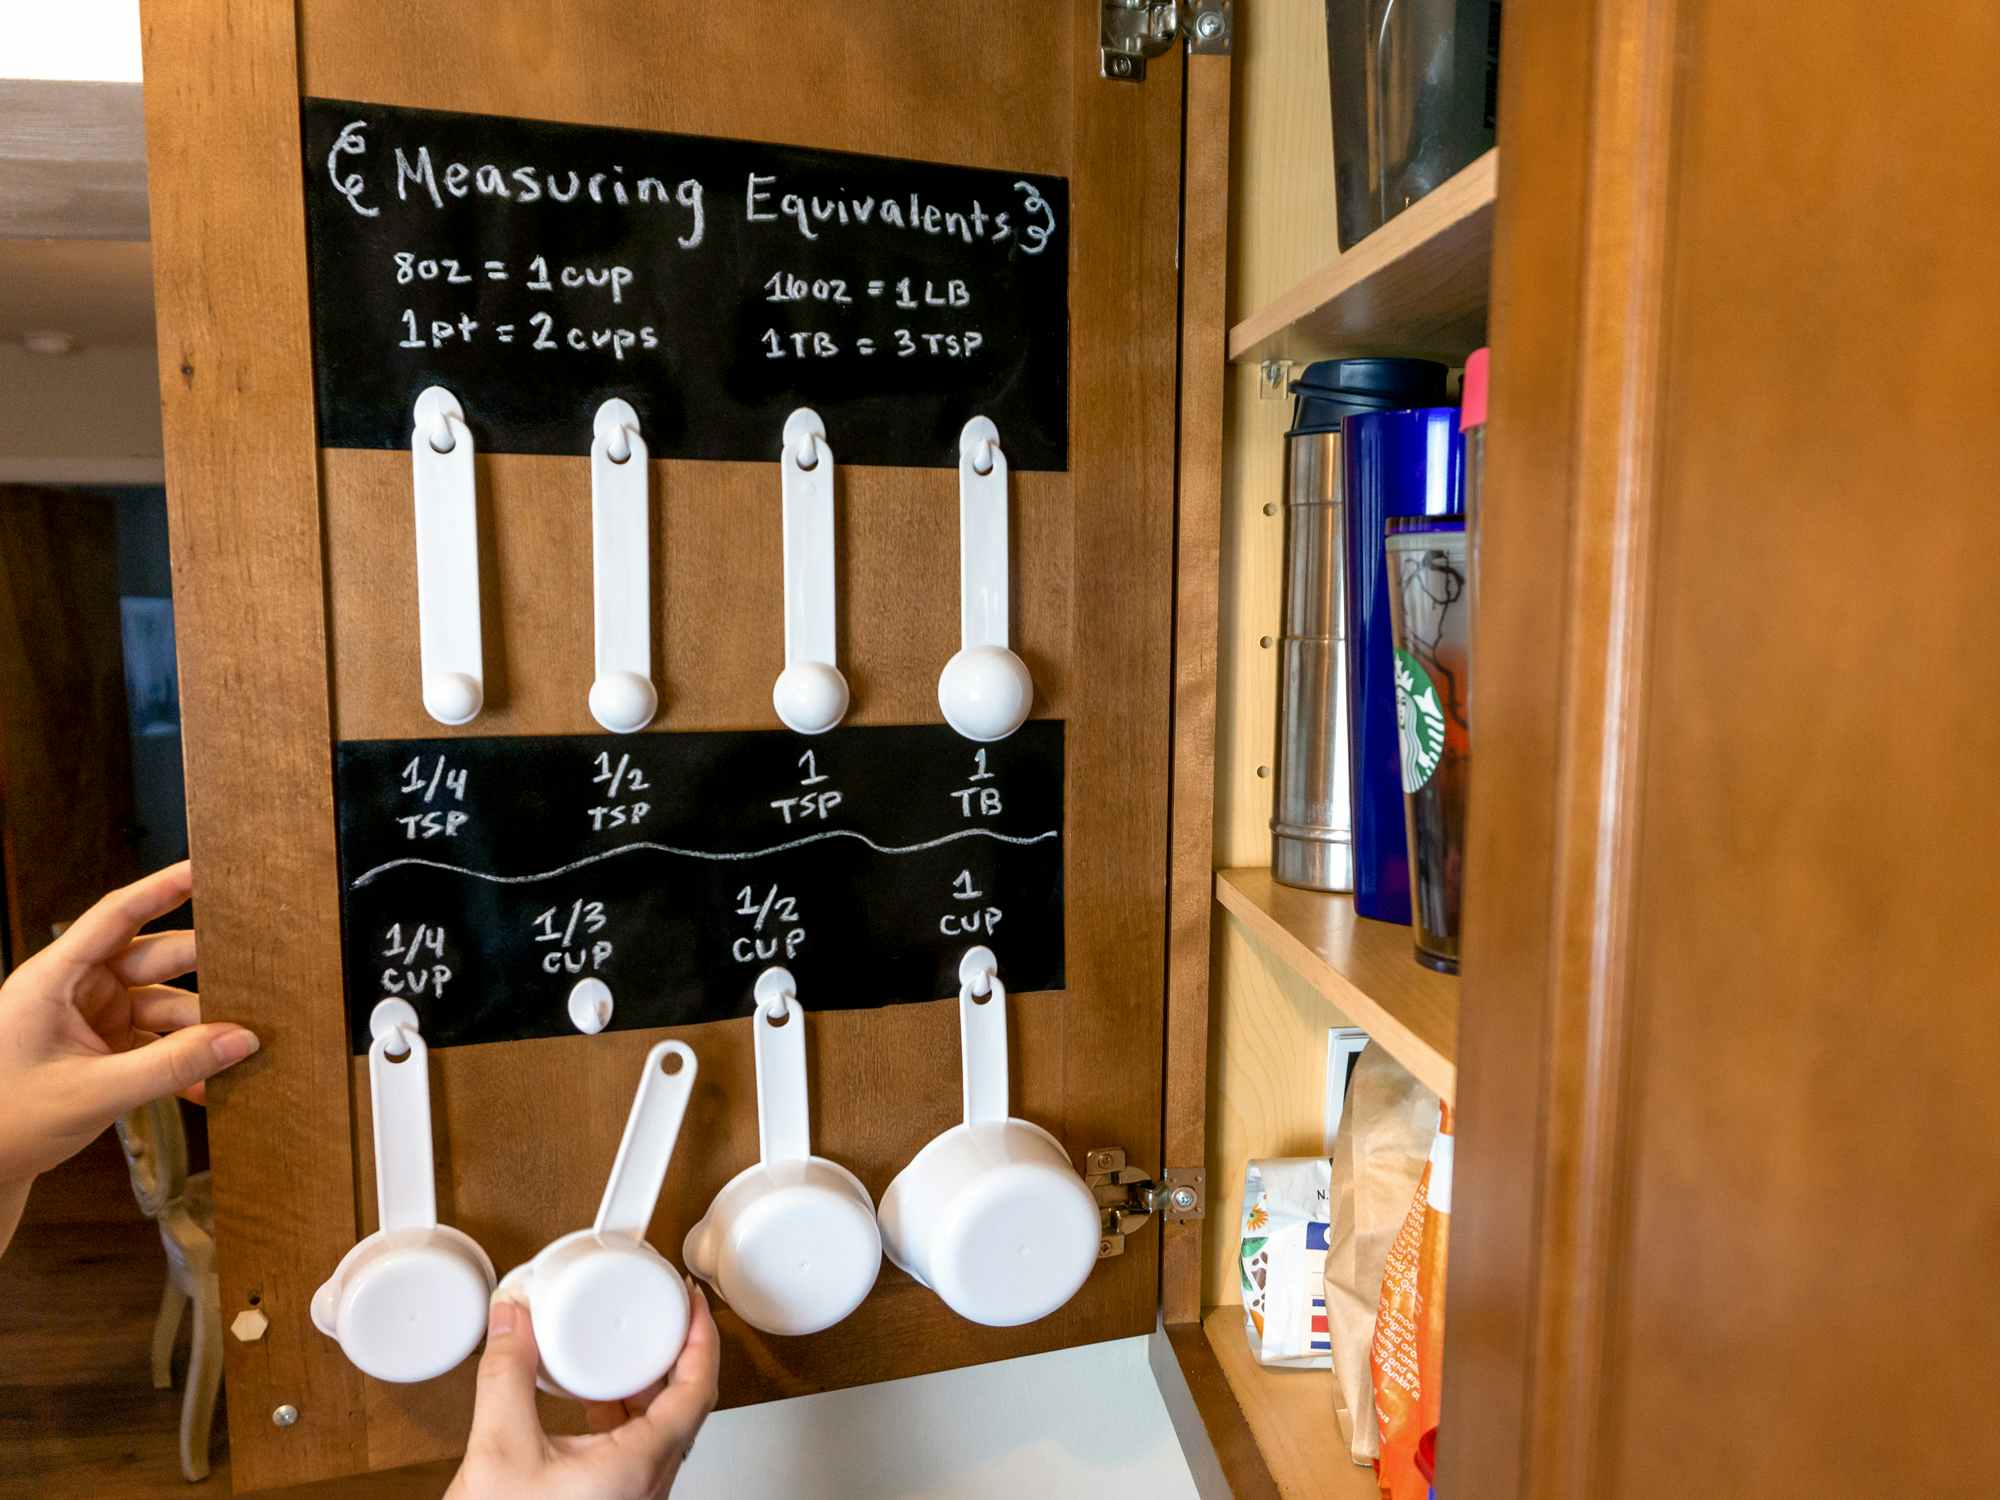 Someone hanging a measuring cup on a hook inside of a kitchen cabinet with chalkboard stickers showing the measurements and common equivalencies